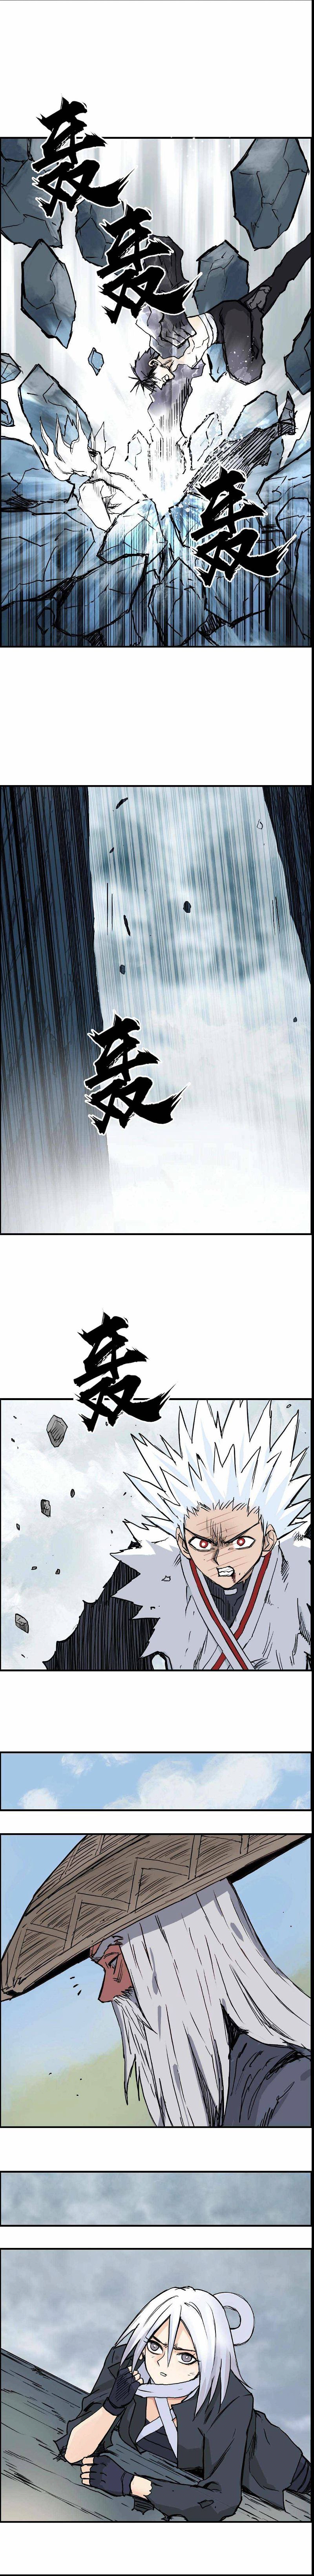 Super Cube Chapter 233 page 5